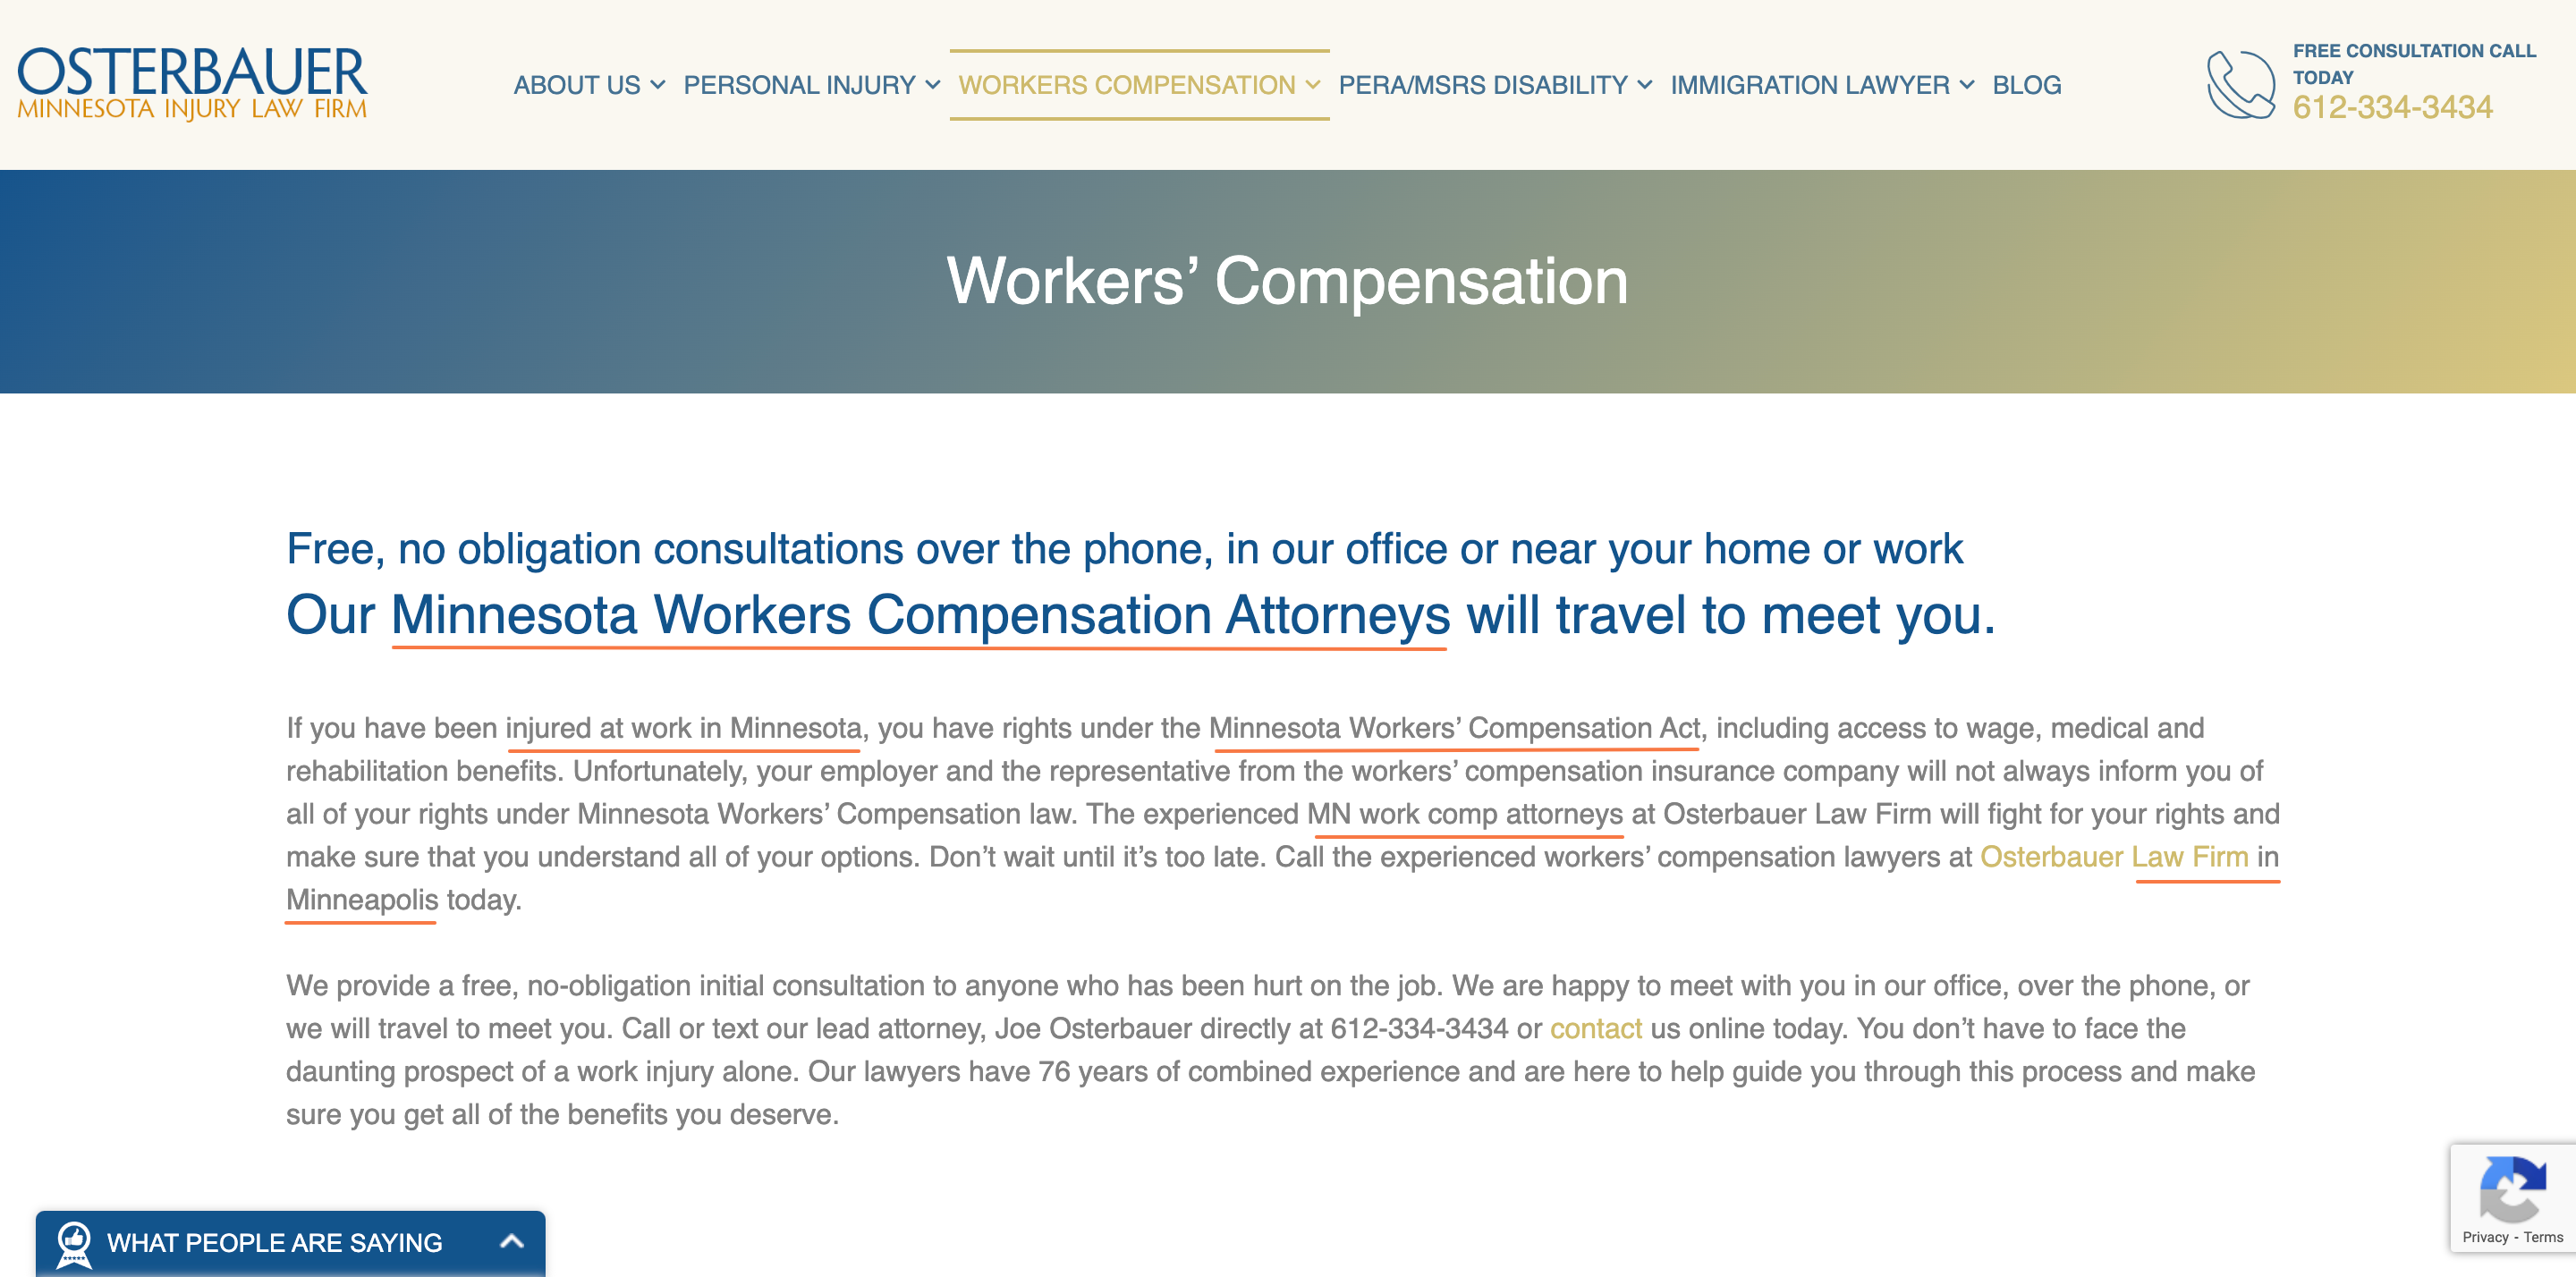 Best-Law-Firm-For-Workers-Compensation-Minnesota-Work-Comp-Lawyers-AttorneysMinneapolis-St-Paul-MN-Advocate-For-Workers-Compensation-Claims-Twin-Cities (1) - Agency Jet